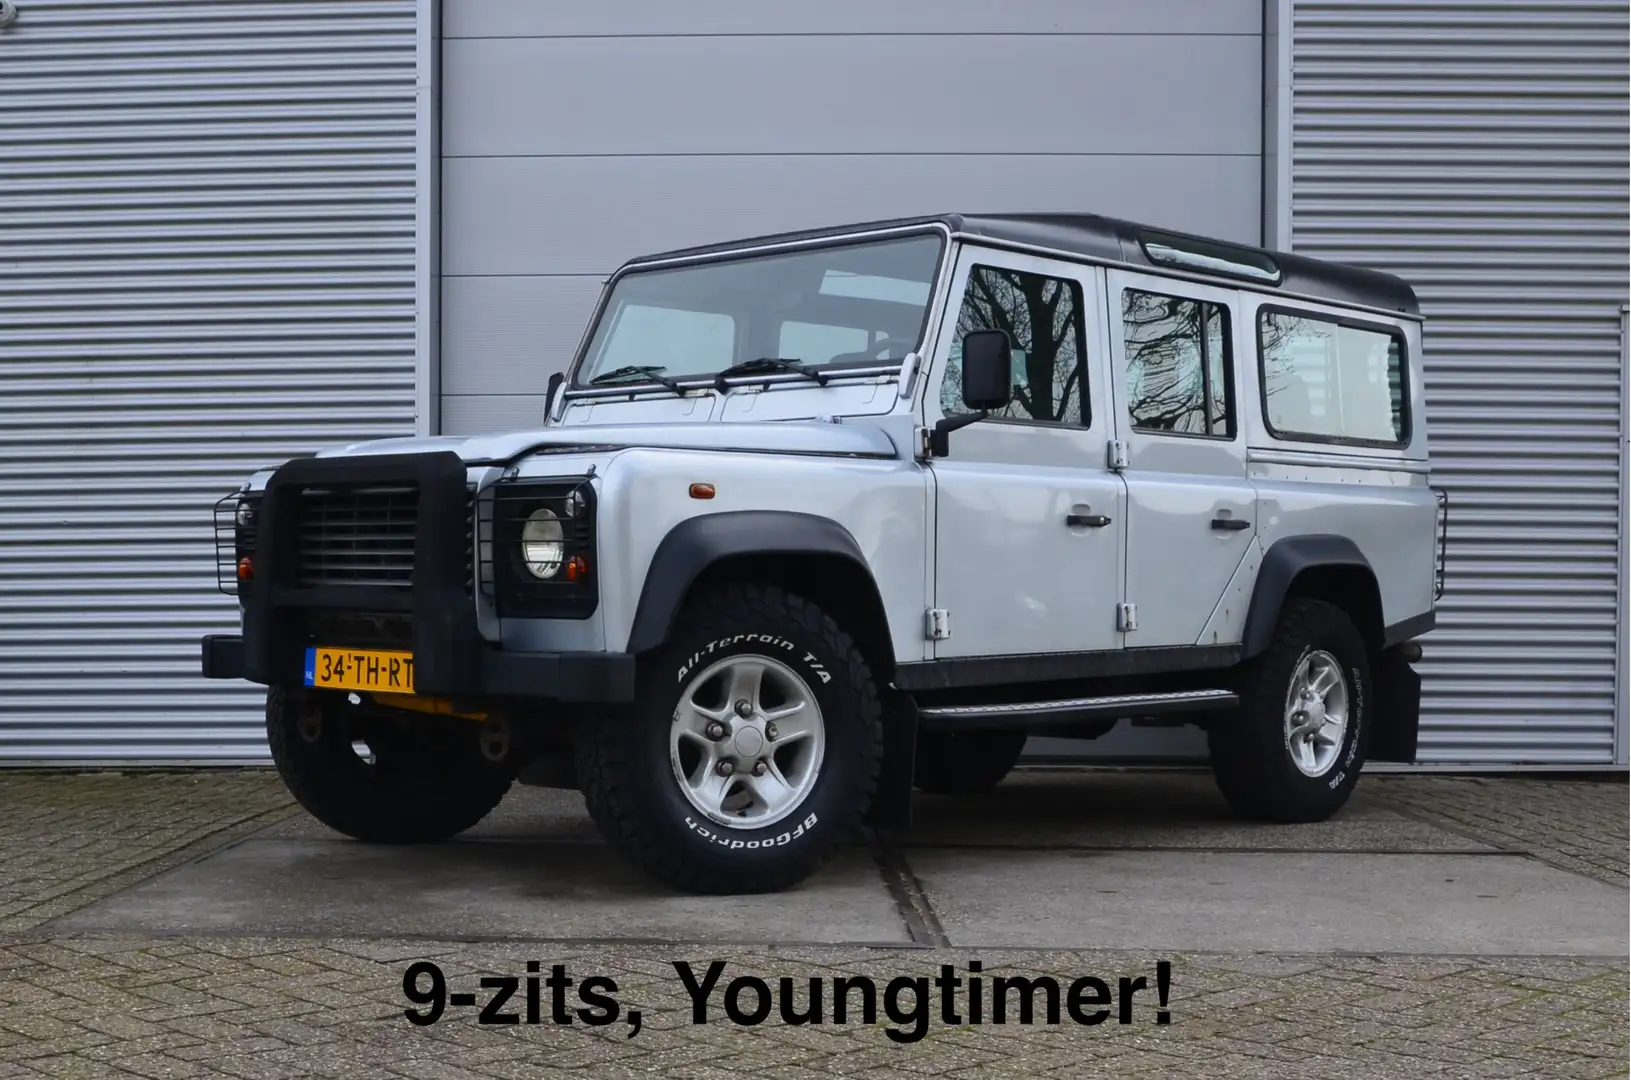 Land Rover Defender 2.5 TD5 110 SW XTech 9-zits, Youngtimer! fin. 542, siva - 1